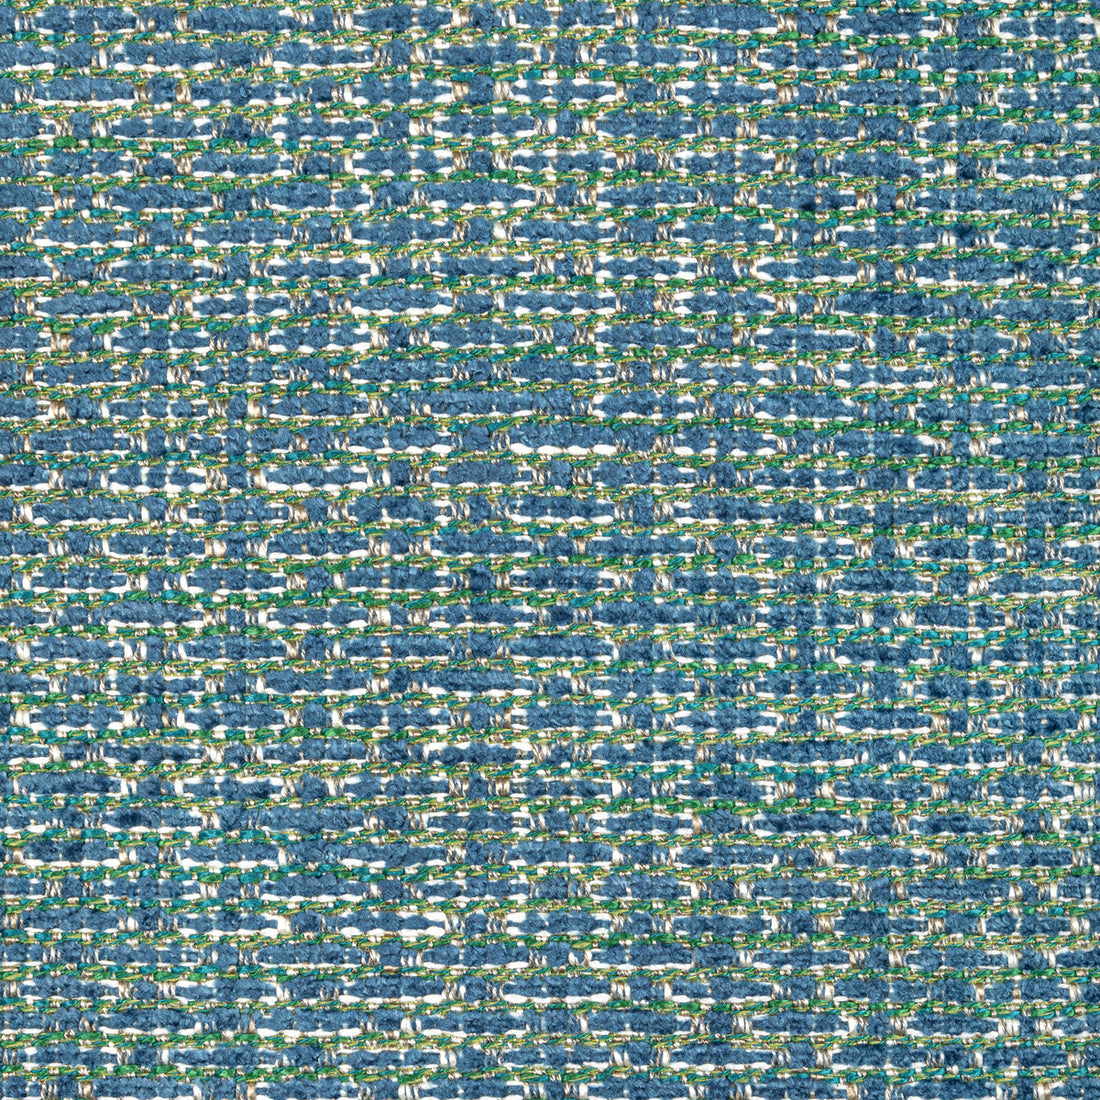 Kravet Design fabric in 36409-523 color - pattern 36409.523.0 - by Kravet Design in the Performance Crypton Home collection